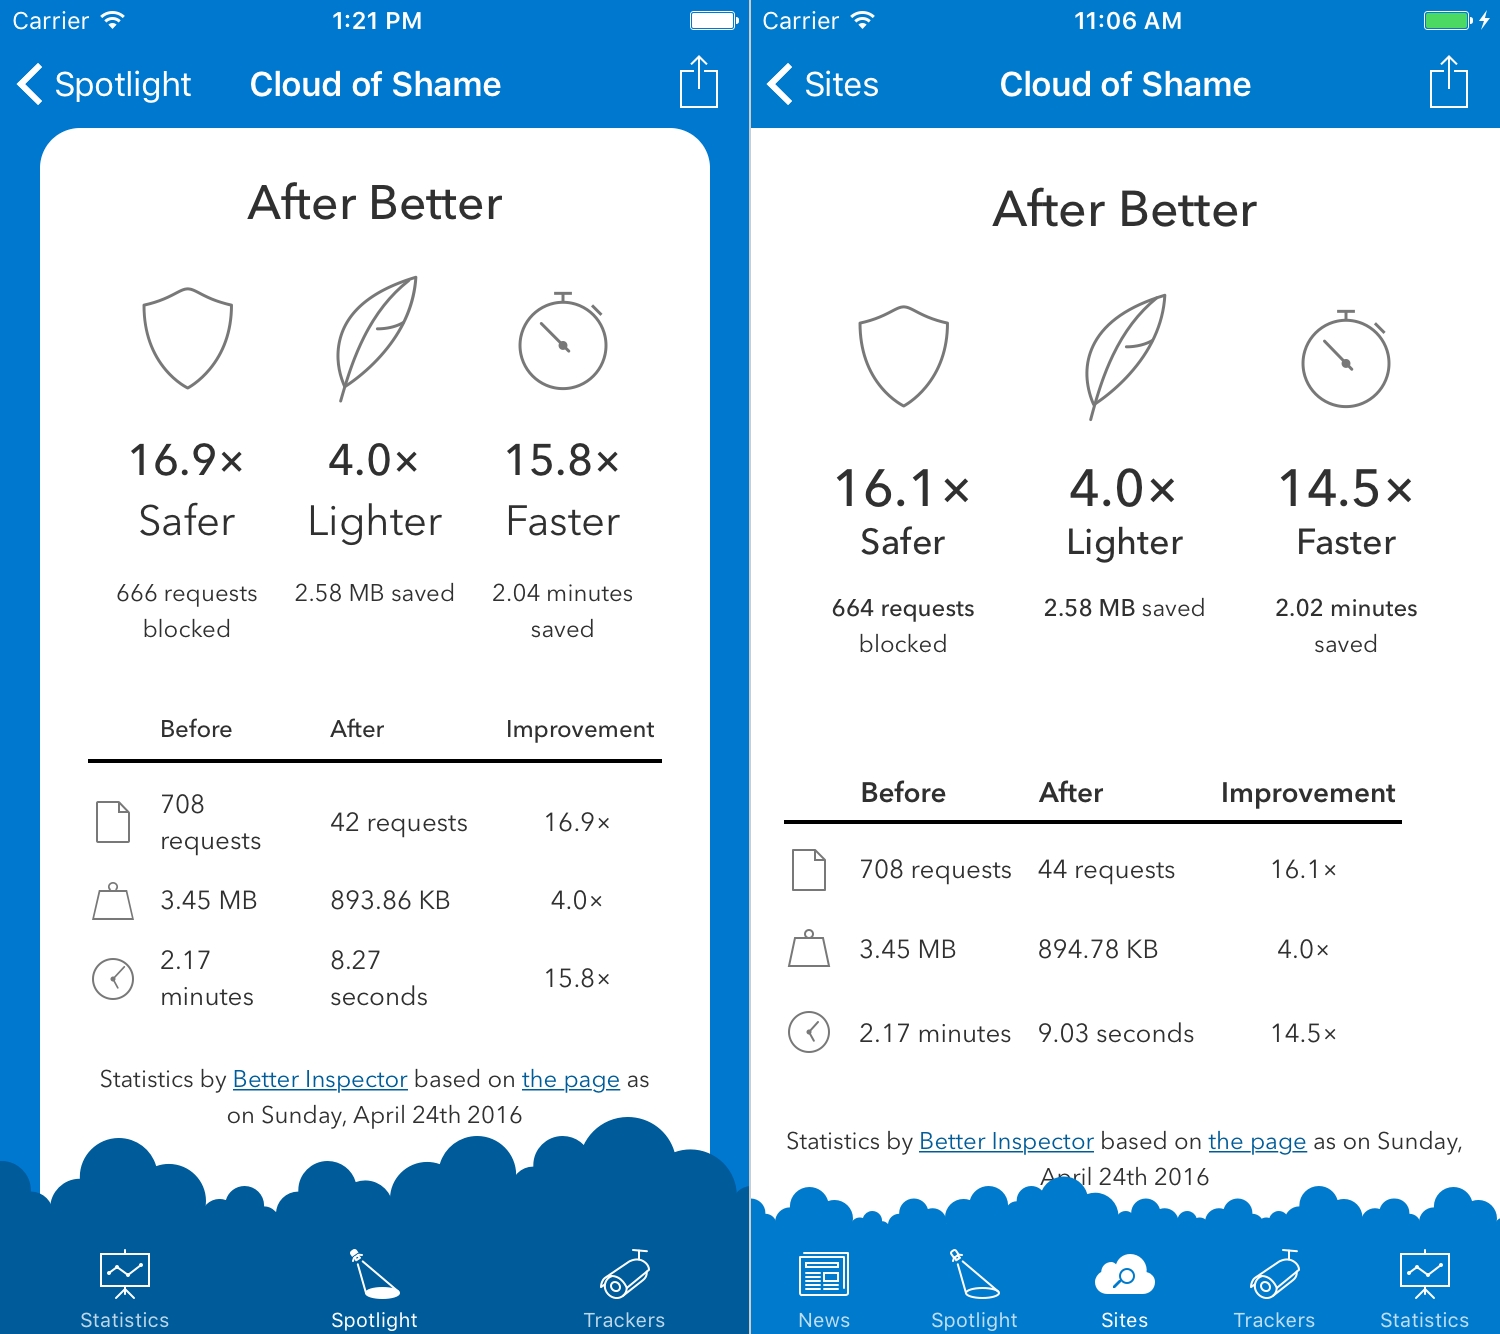 Two screenshots of the statistics on the Cloud of Shame on iPhone 6